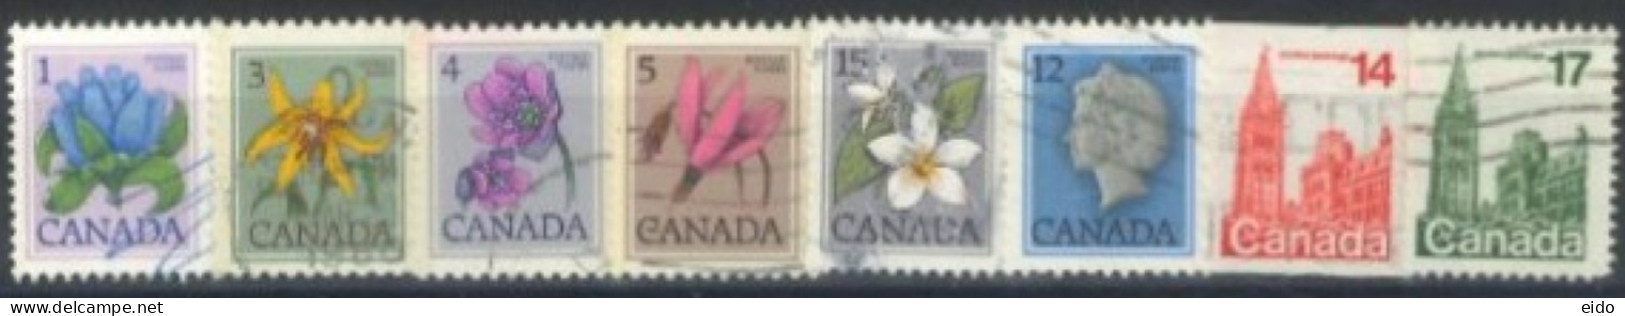 CANADA - 1977, QUEEN ELIZABETH II, HOUSE OF PARLIAMENT, FLOWERS STAMPS SET OF 8, USED. - Usados